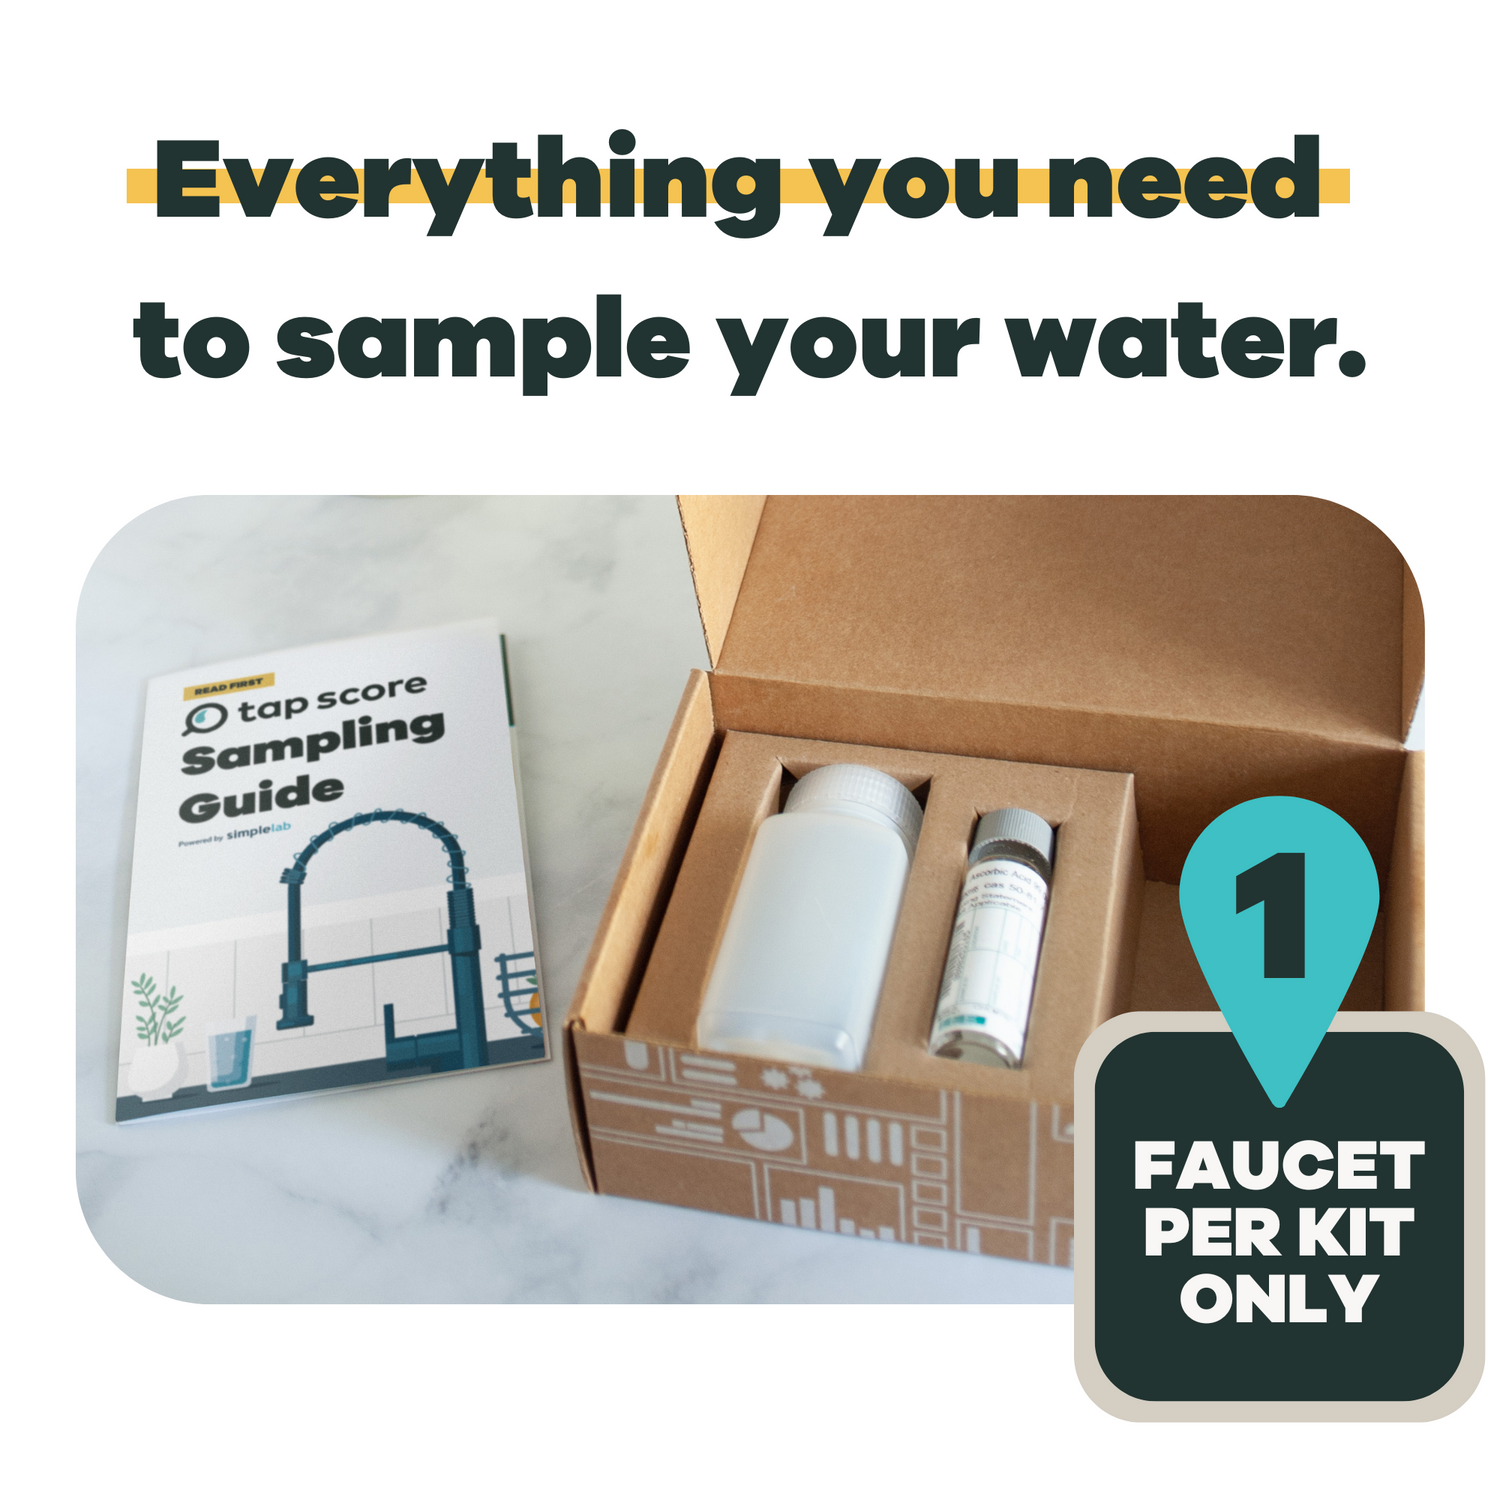 Mail-in water test kit for certified laboratory